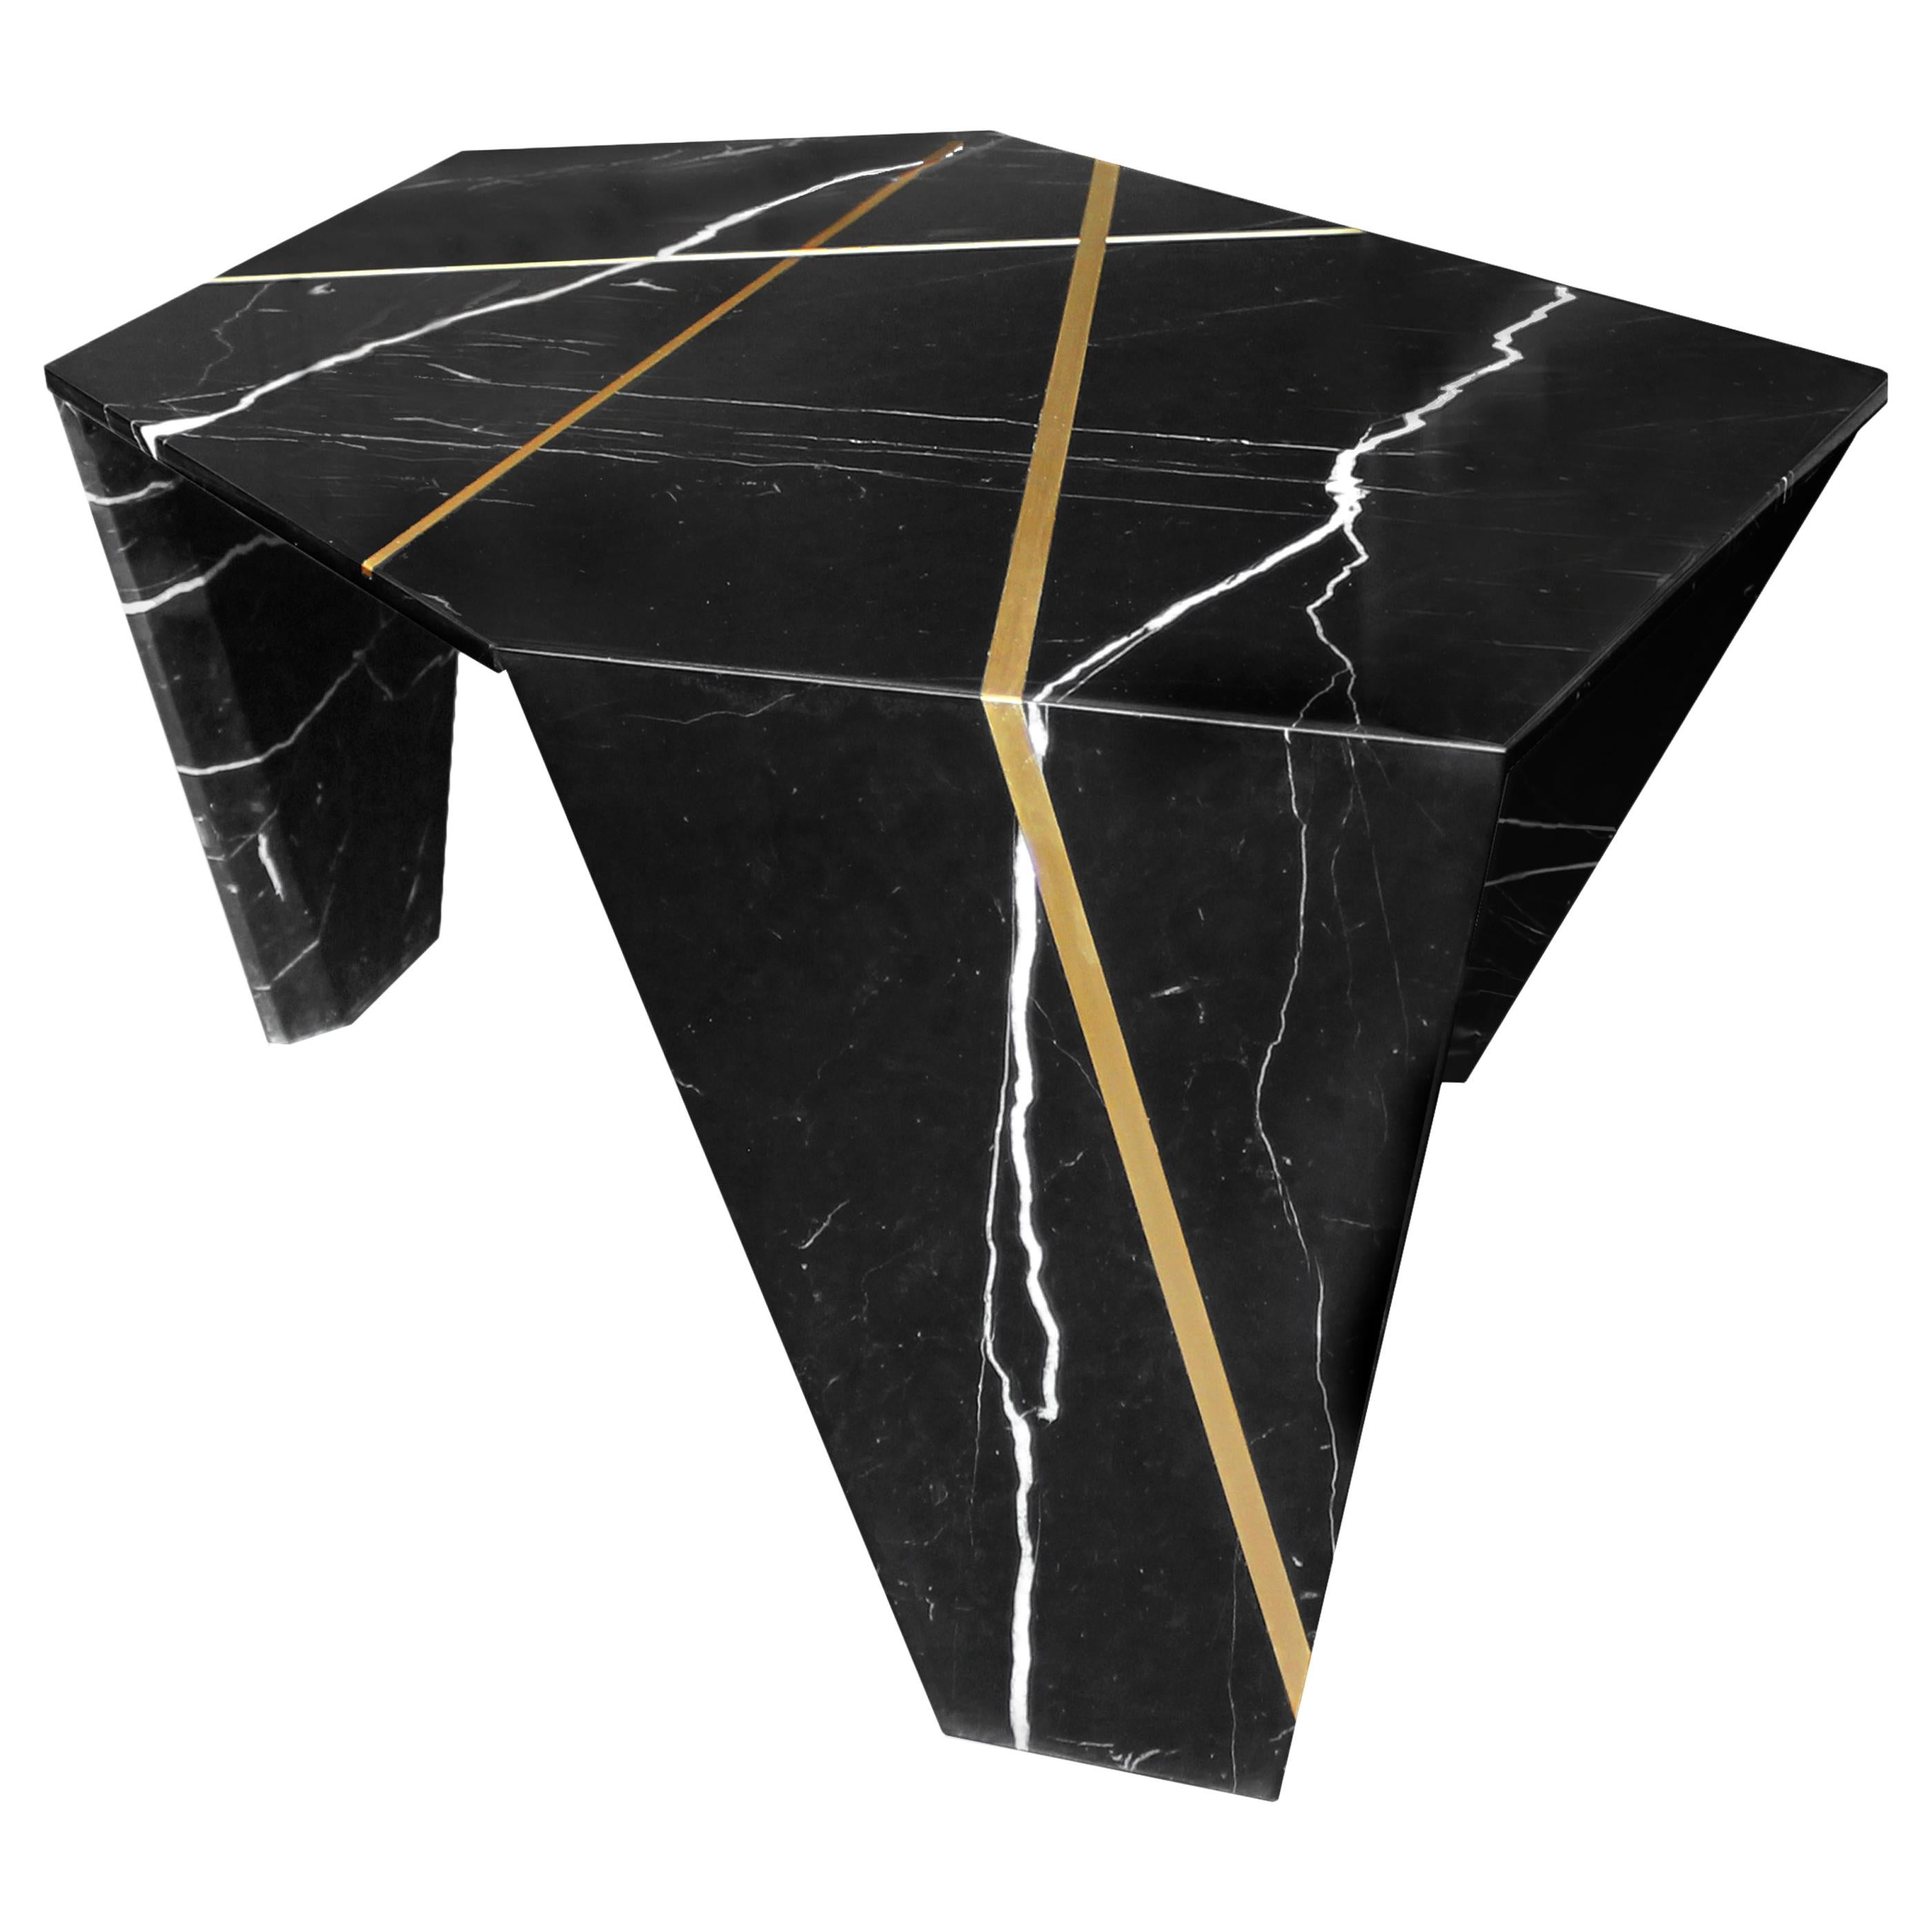 Planar Sculptural Marble Cocktail Table with Inlaid Bronze im Angebot